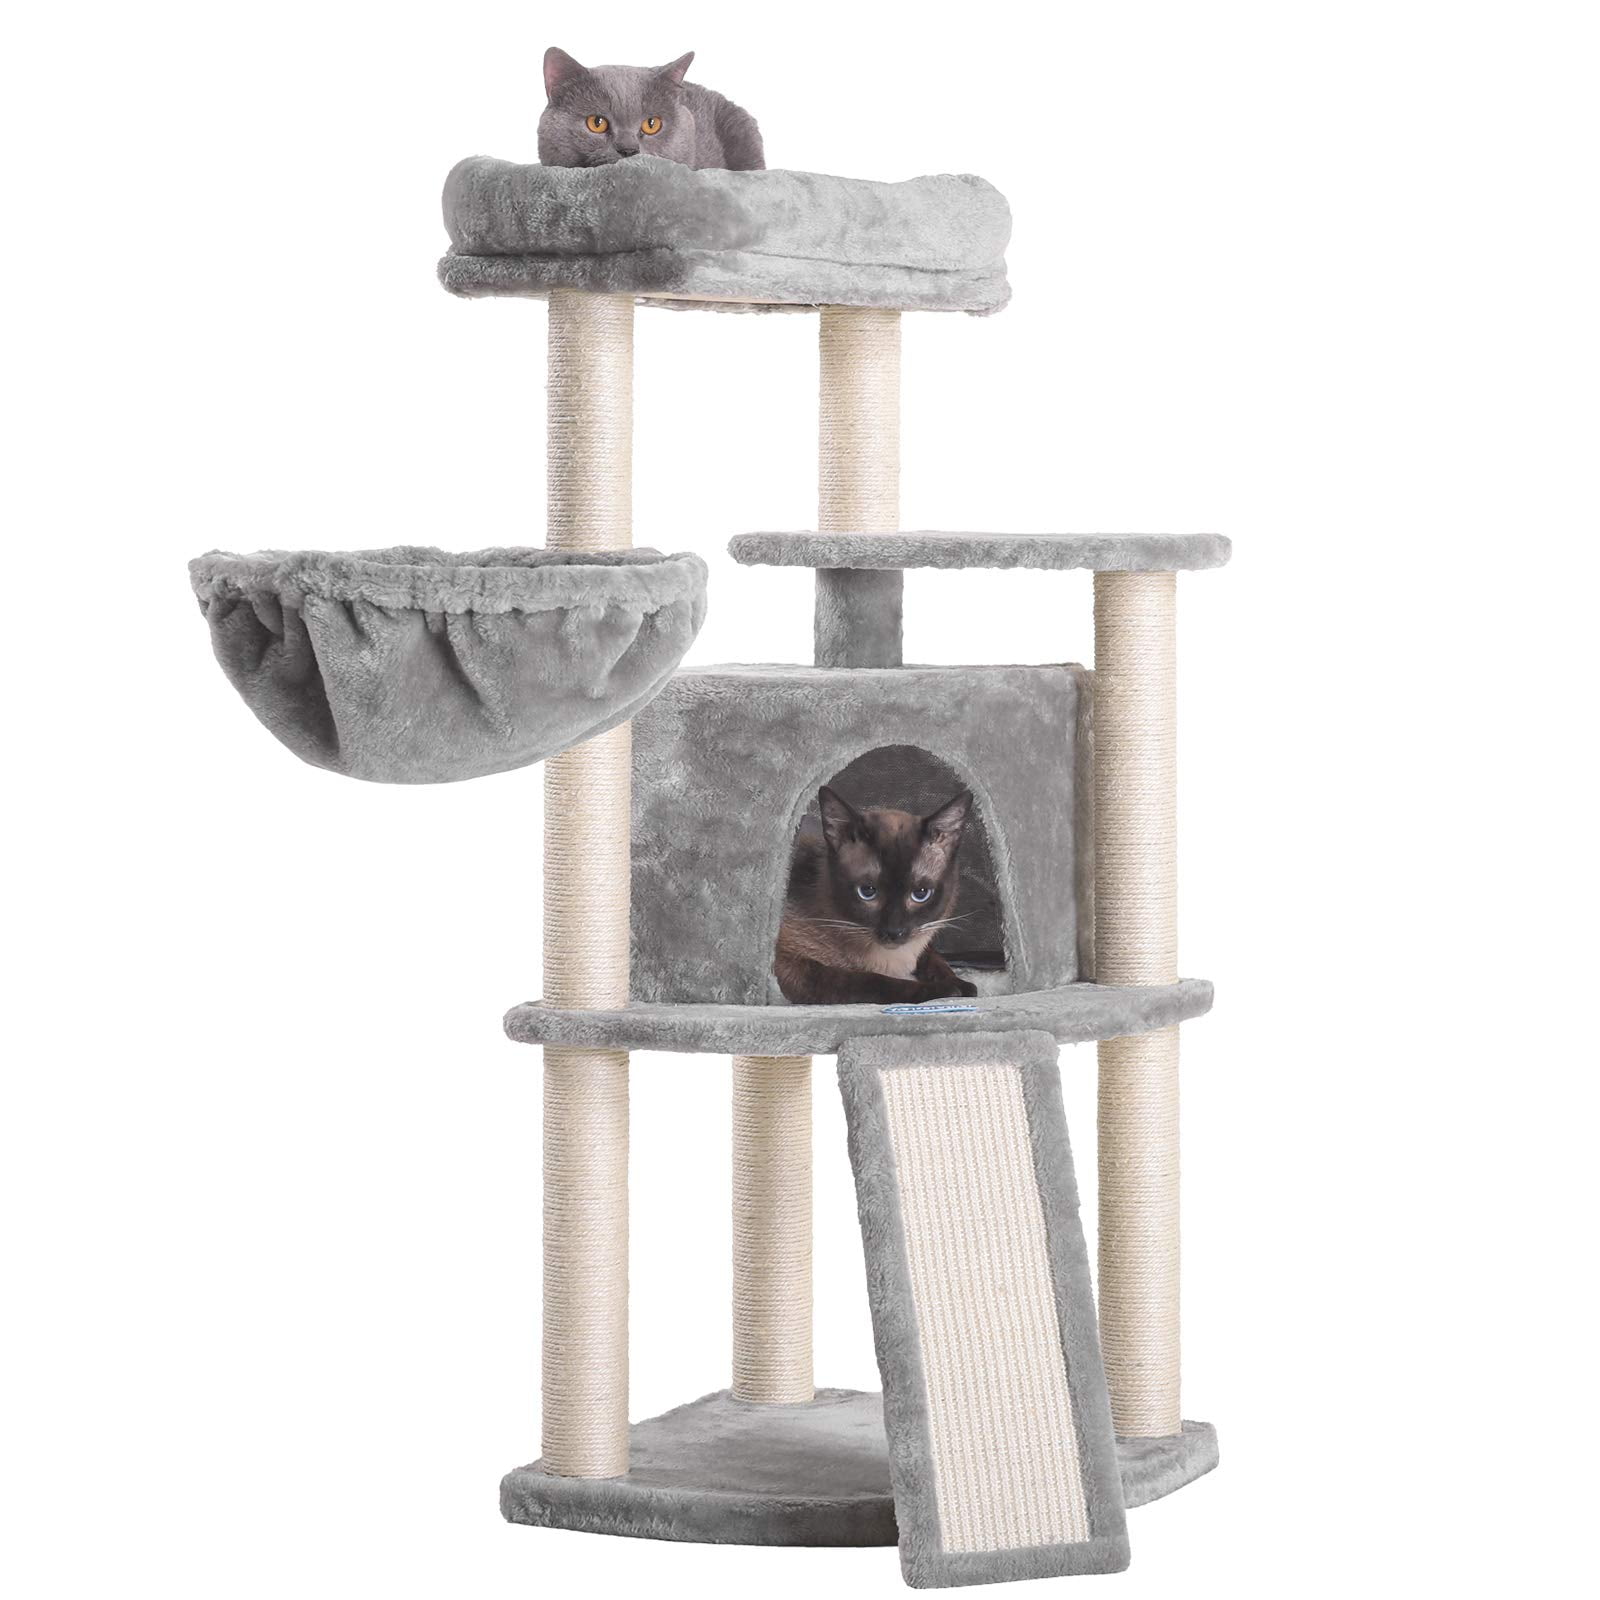 Cats and Pets Hey-brother Multi-Level Cat Tree Condo Furniture with Sisal-Covered Scratching Posts for Kittens 